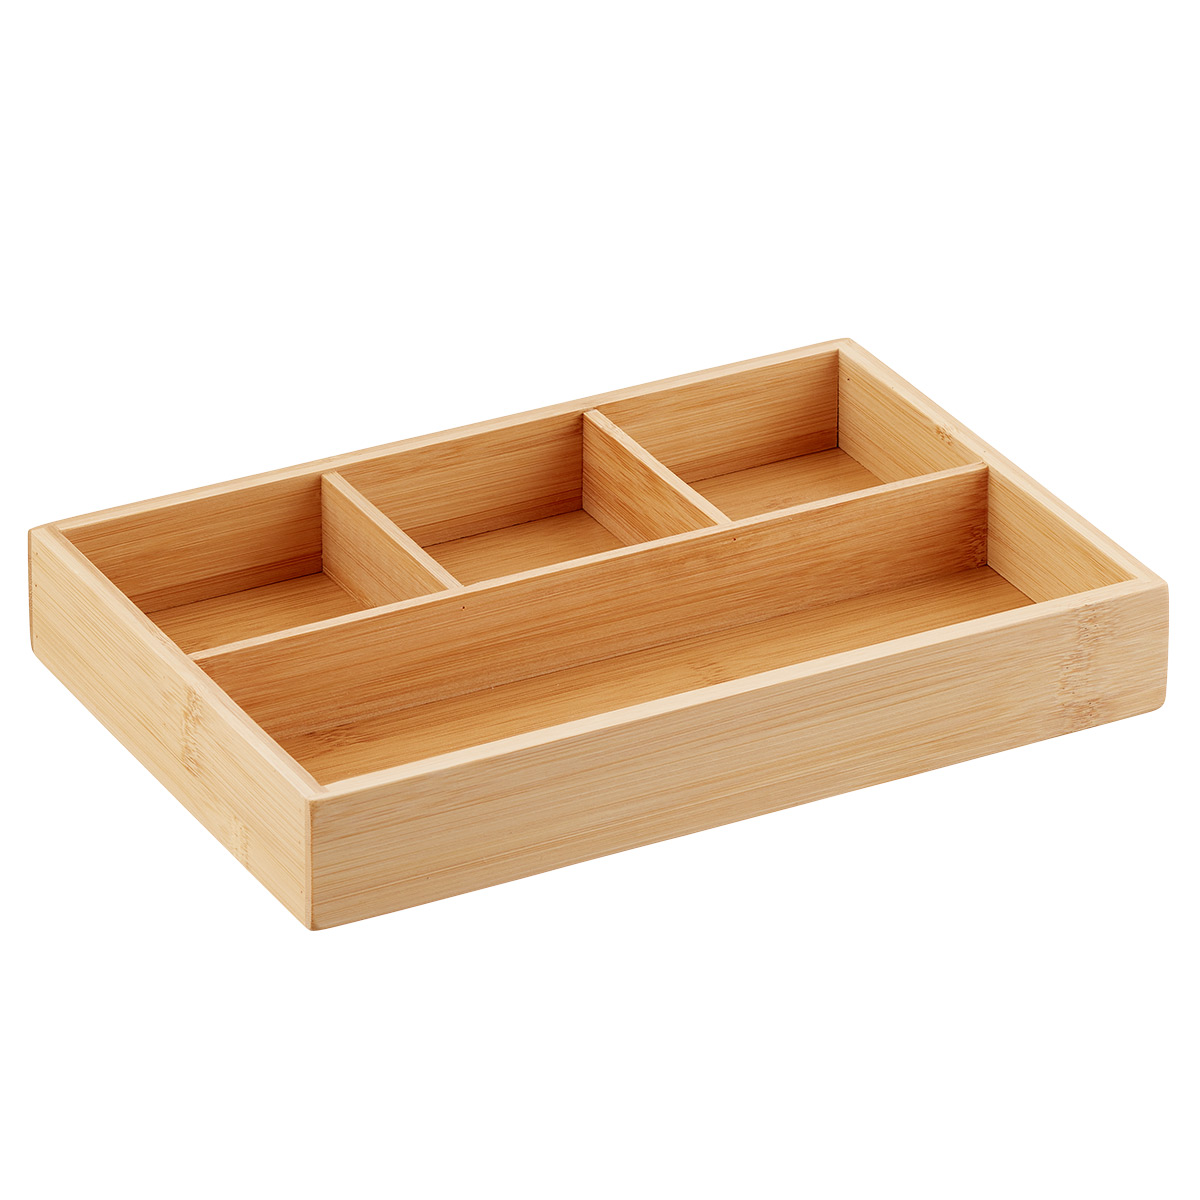 The Container Store Bamboo Drawer Organizers | The Container Store